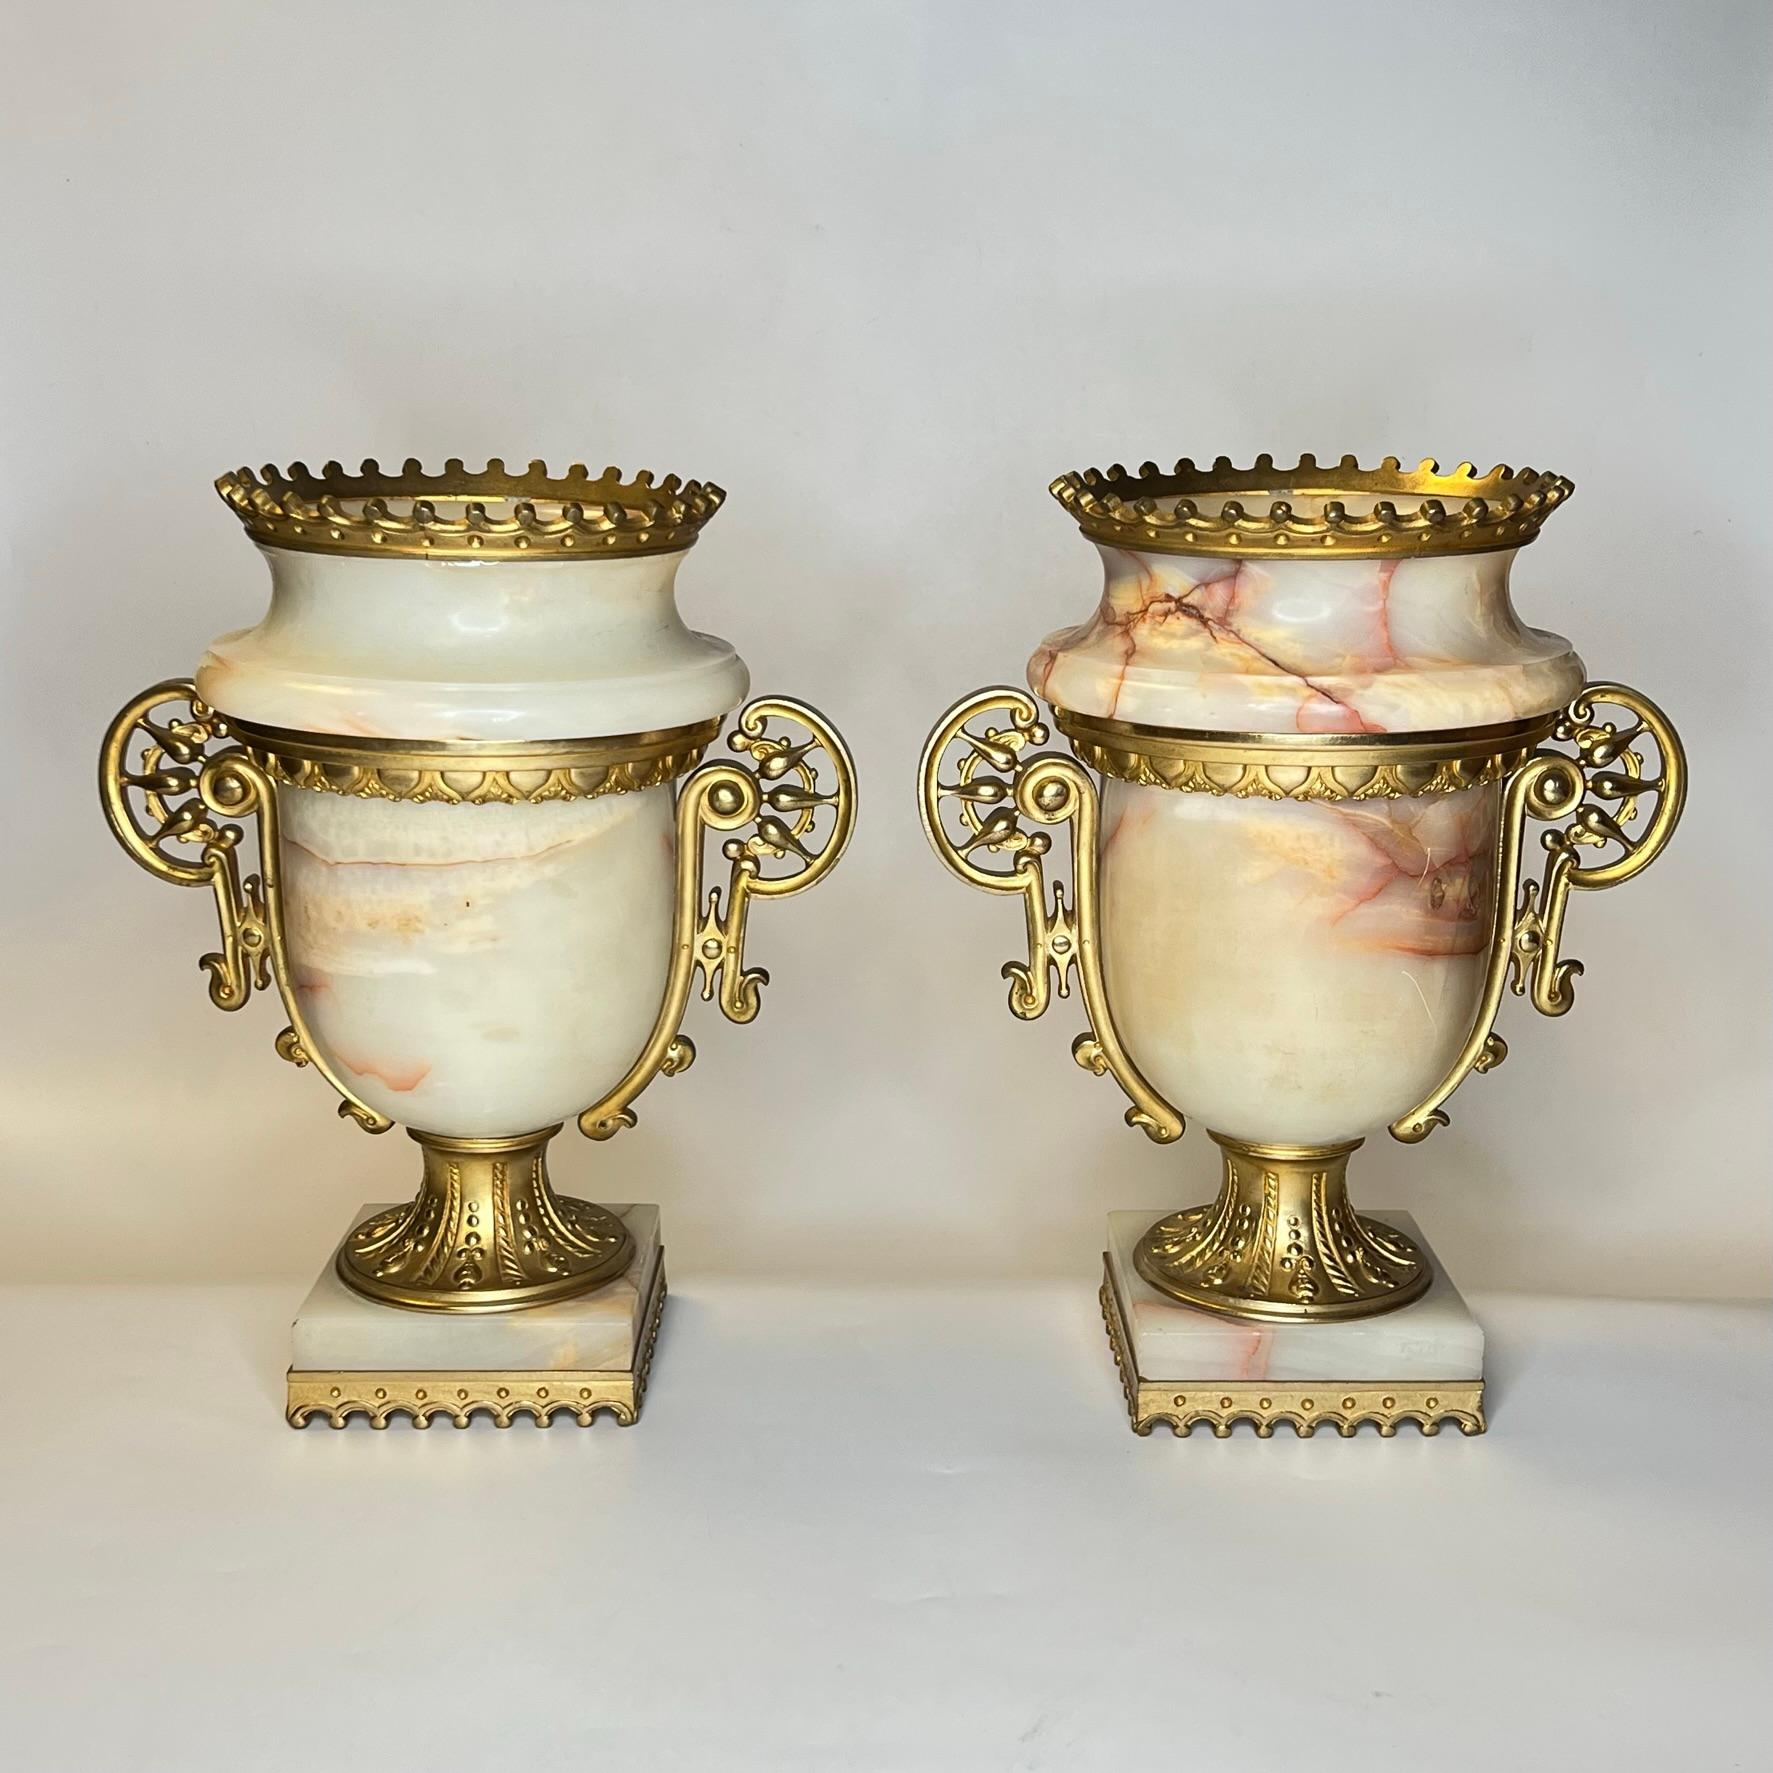 Renaissance Revival Pair Antique Gilt Bronze Mounted Onyx Urns in Neoclassical Style For Sale